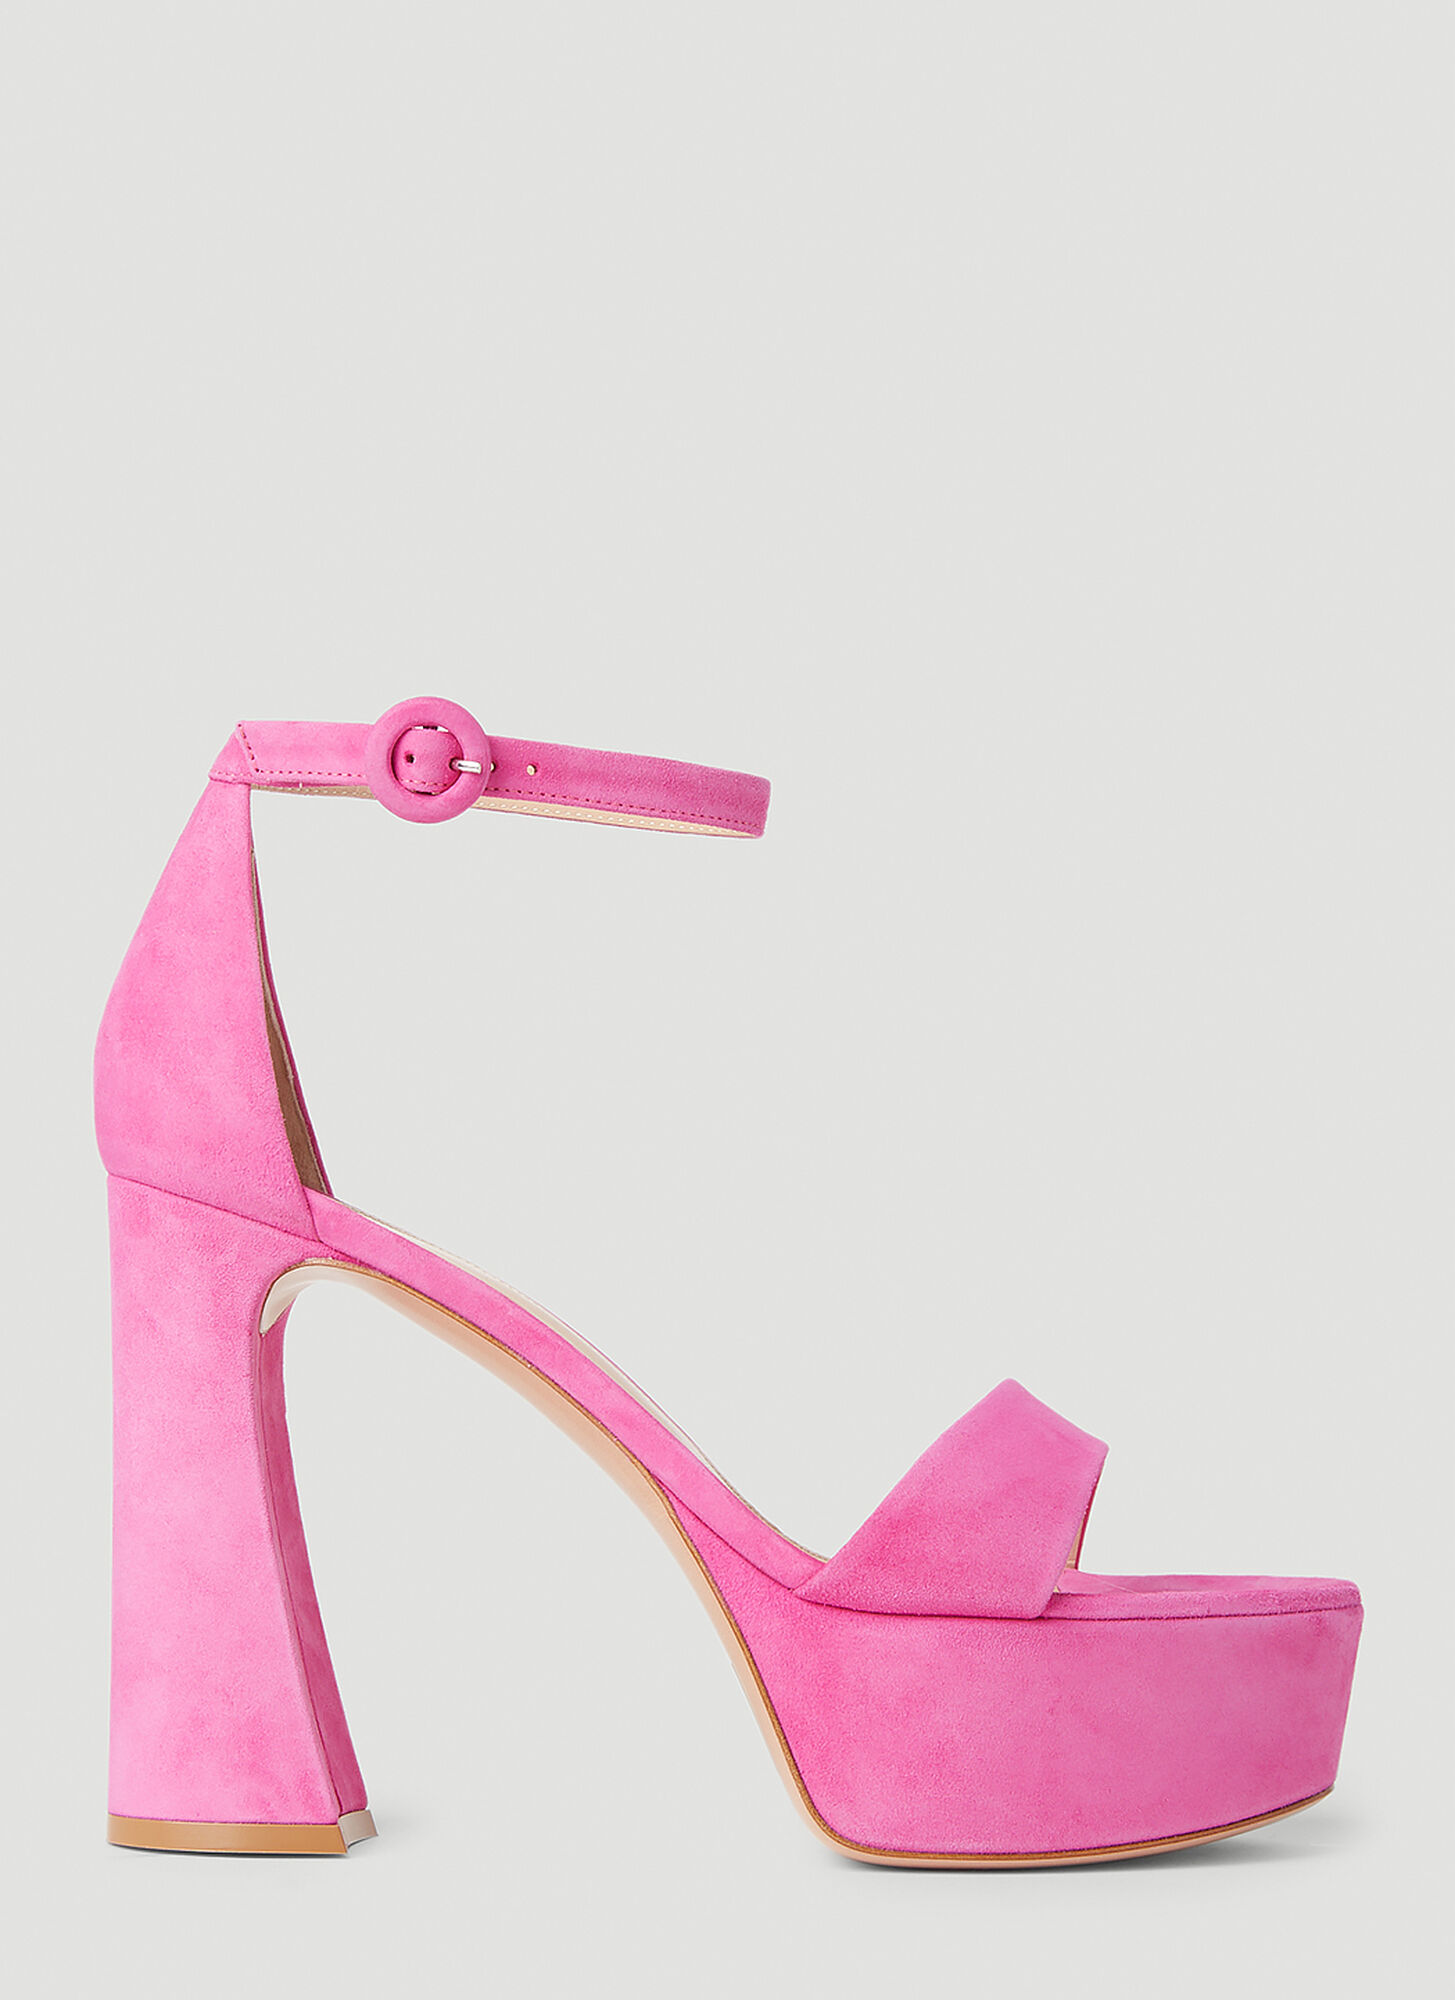 Gianvito Rossi Holly High Heel Sandals In Pink